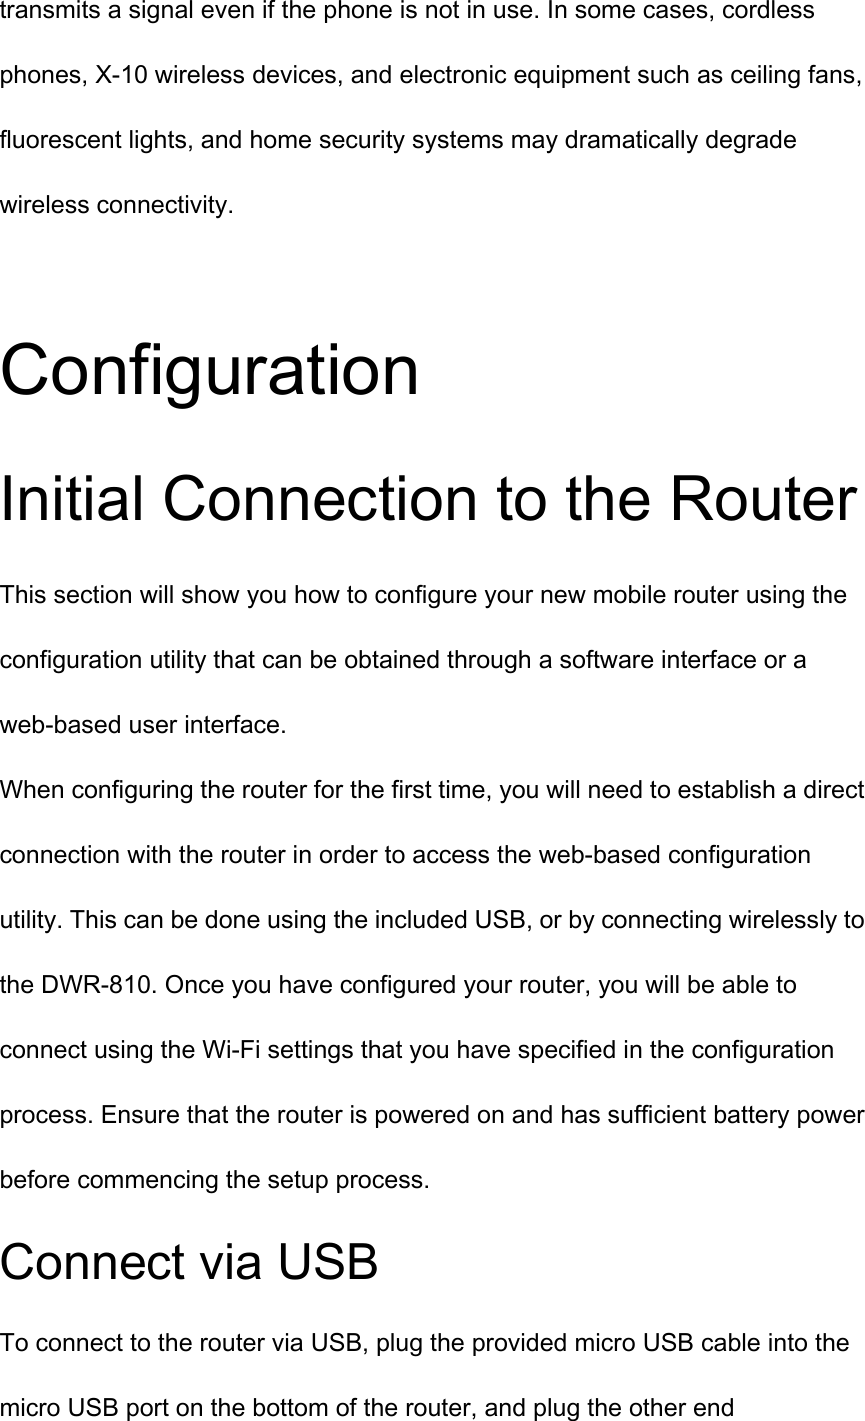 transmits a signal even if the phone is not in use. In some cases, cordless phones, X-10 wireless devices, and electronic equipment such as ceiling fans, fluorescent lights, and home security systems may dramatically degrade wireless connectivity.  Configuration Initial Connection to the Router This section will show you how to configure your new mobile router using the configuration utility that can be obtained through a software interface or a web-based user interface. When configuring the router for the first time, you will need to establish a direct connection with the router in order to access the web-based configuration utility. This can be done using the included USB, or by connecting wirelessly to the DWR-810. Once you have configured your router, you will be able to connect using the Wi-Fi settings that you have specified in the configuration process. Ensure that the router is powered on and has sufficient battery power before commencing the setup process. Connect via USB To connect to the router via USB, plug the provided micro USB cable into the micro USB port on the bottom of the router, and plug the other end 